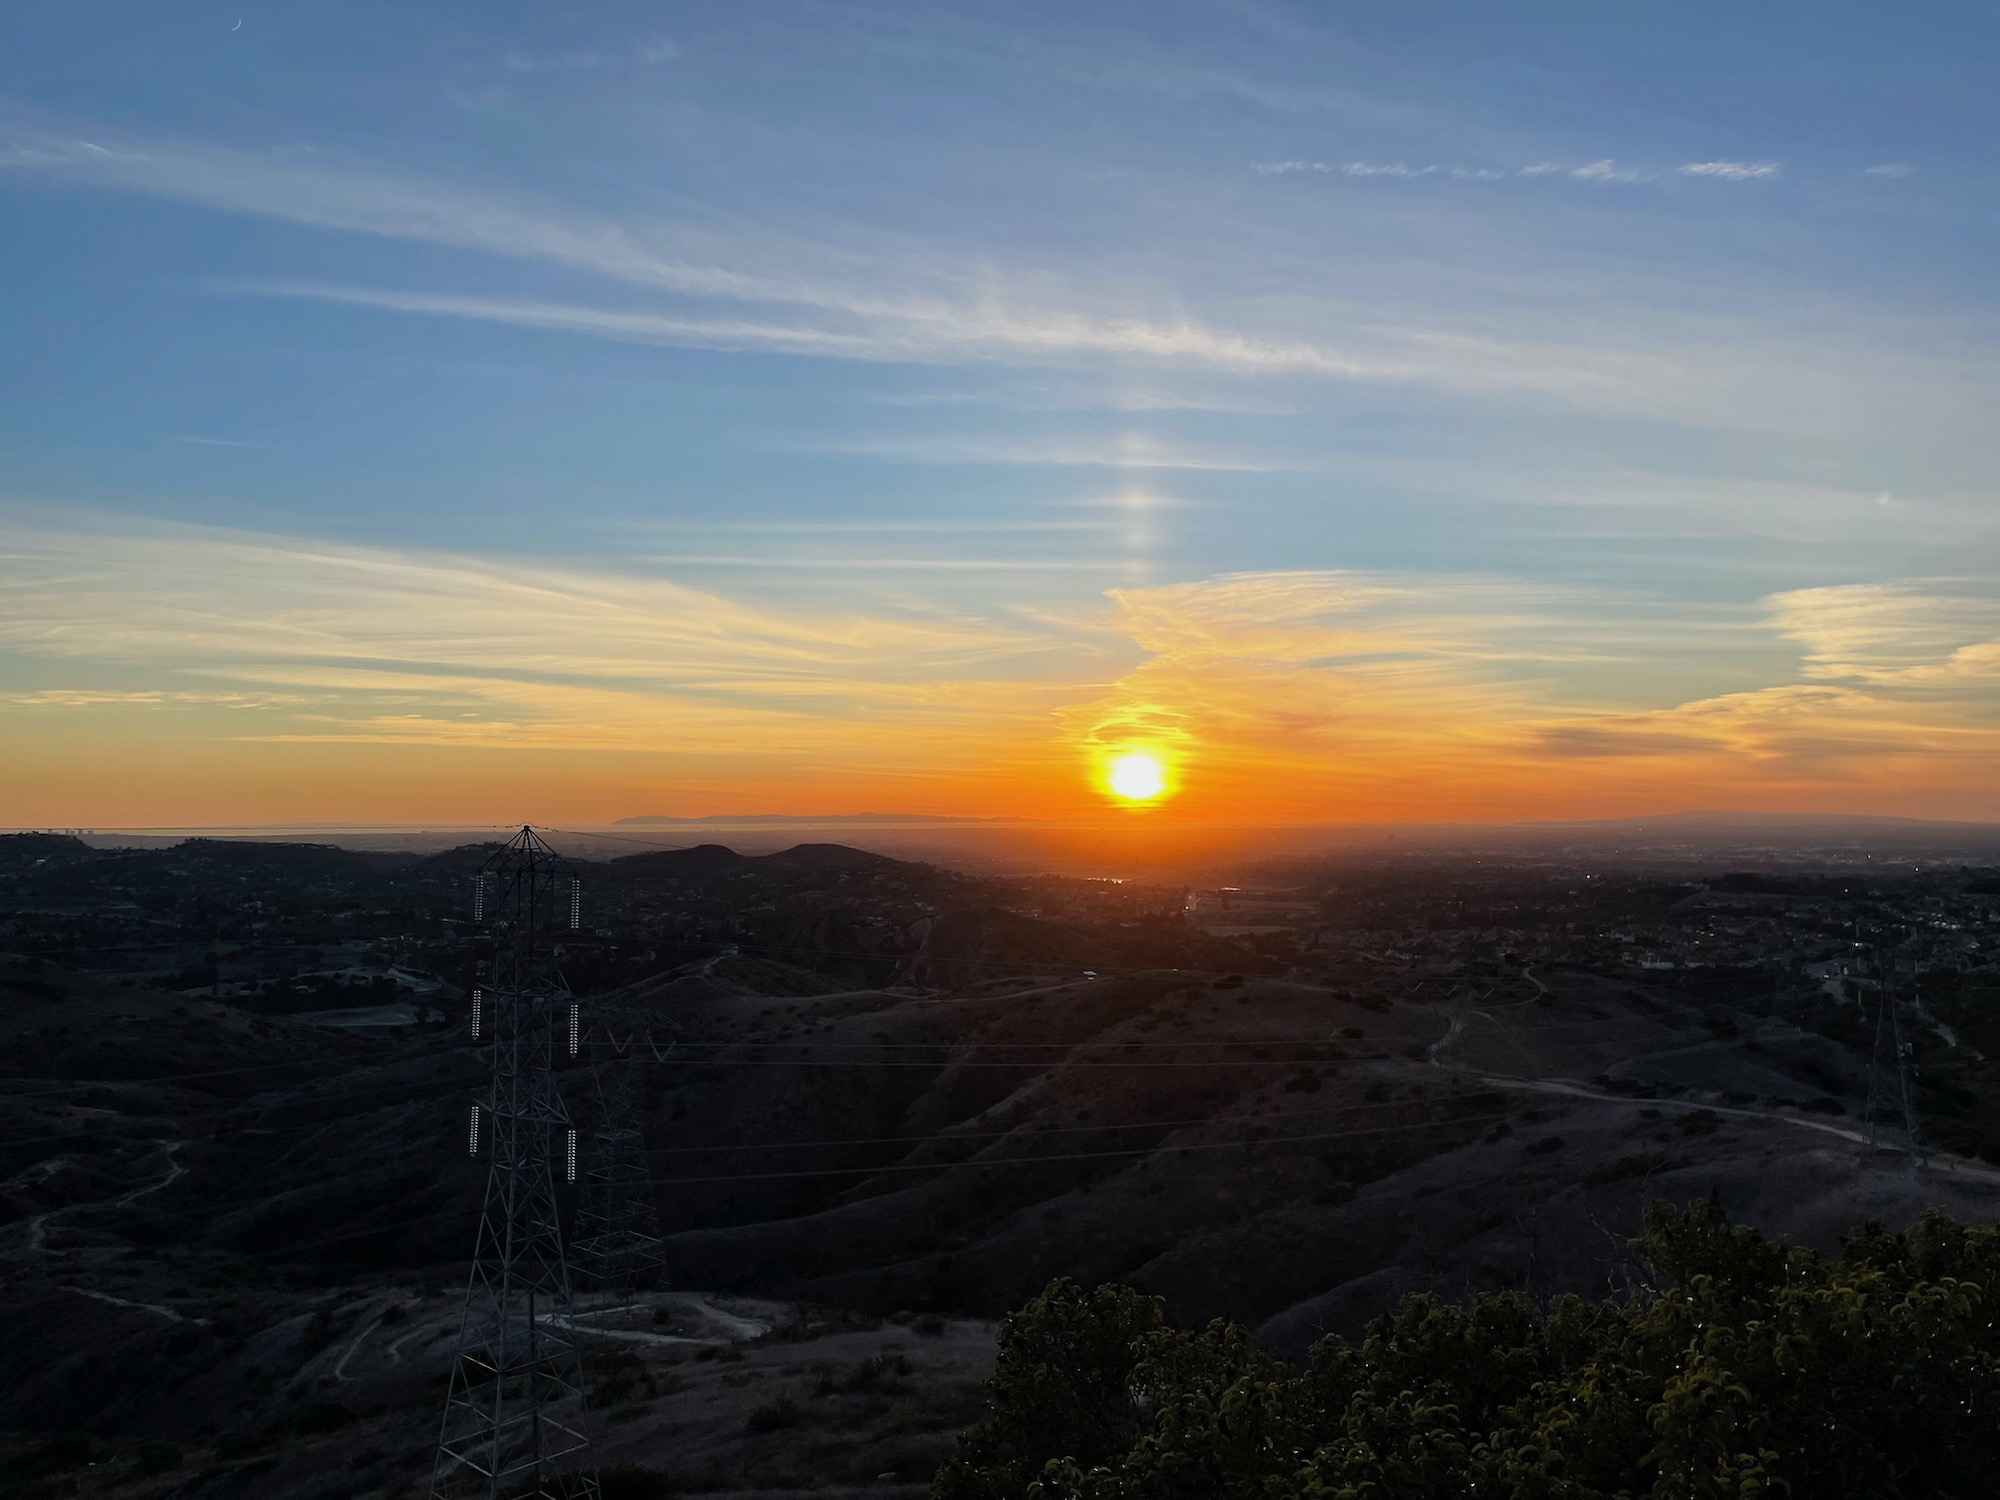 Sunset over pacific ocean - robbers roost vantage point - anaheim hills -18